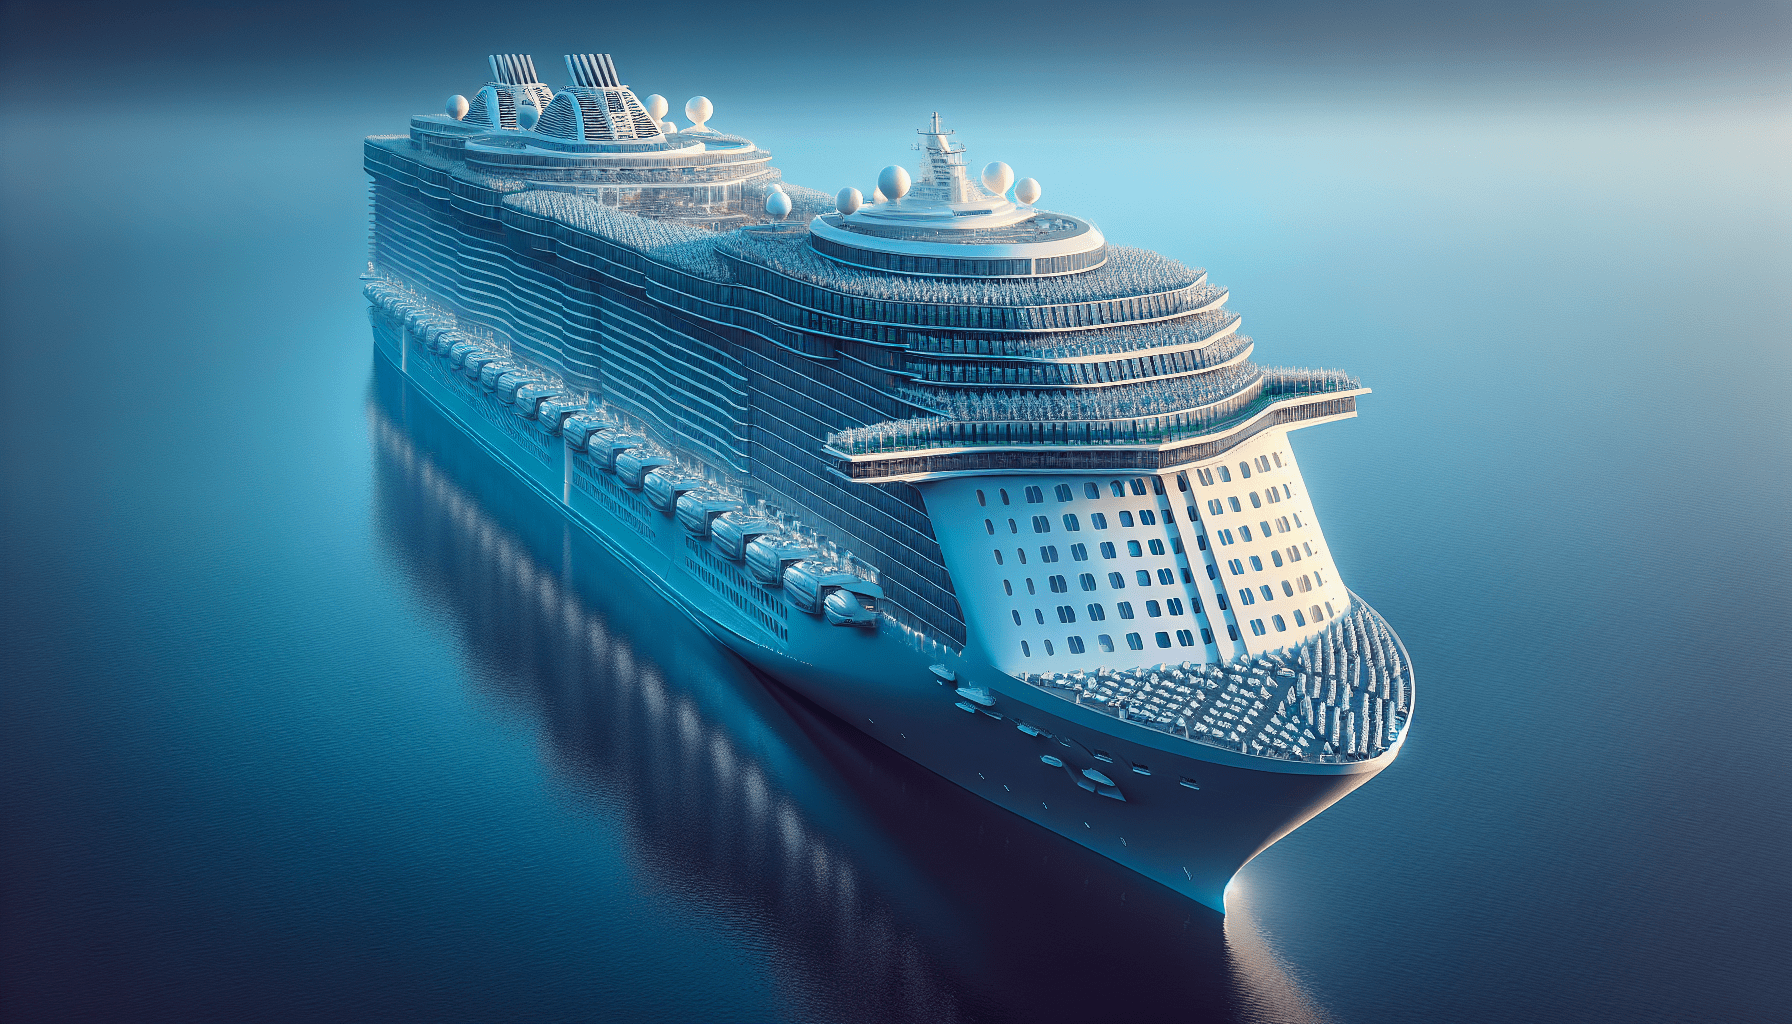 What Is The Biggest Cruise Ship In The World Area?